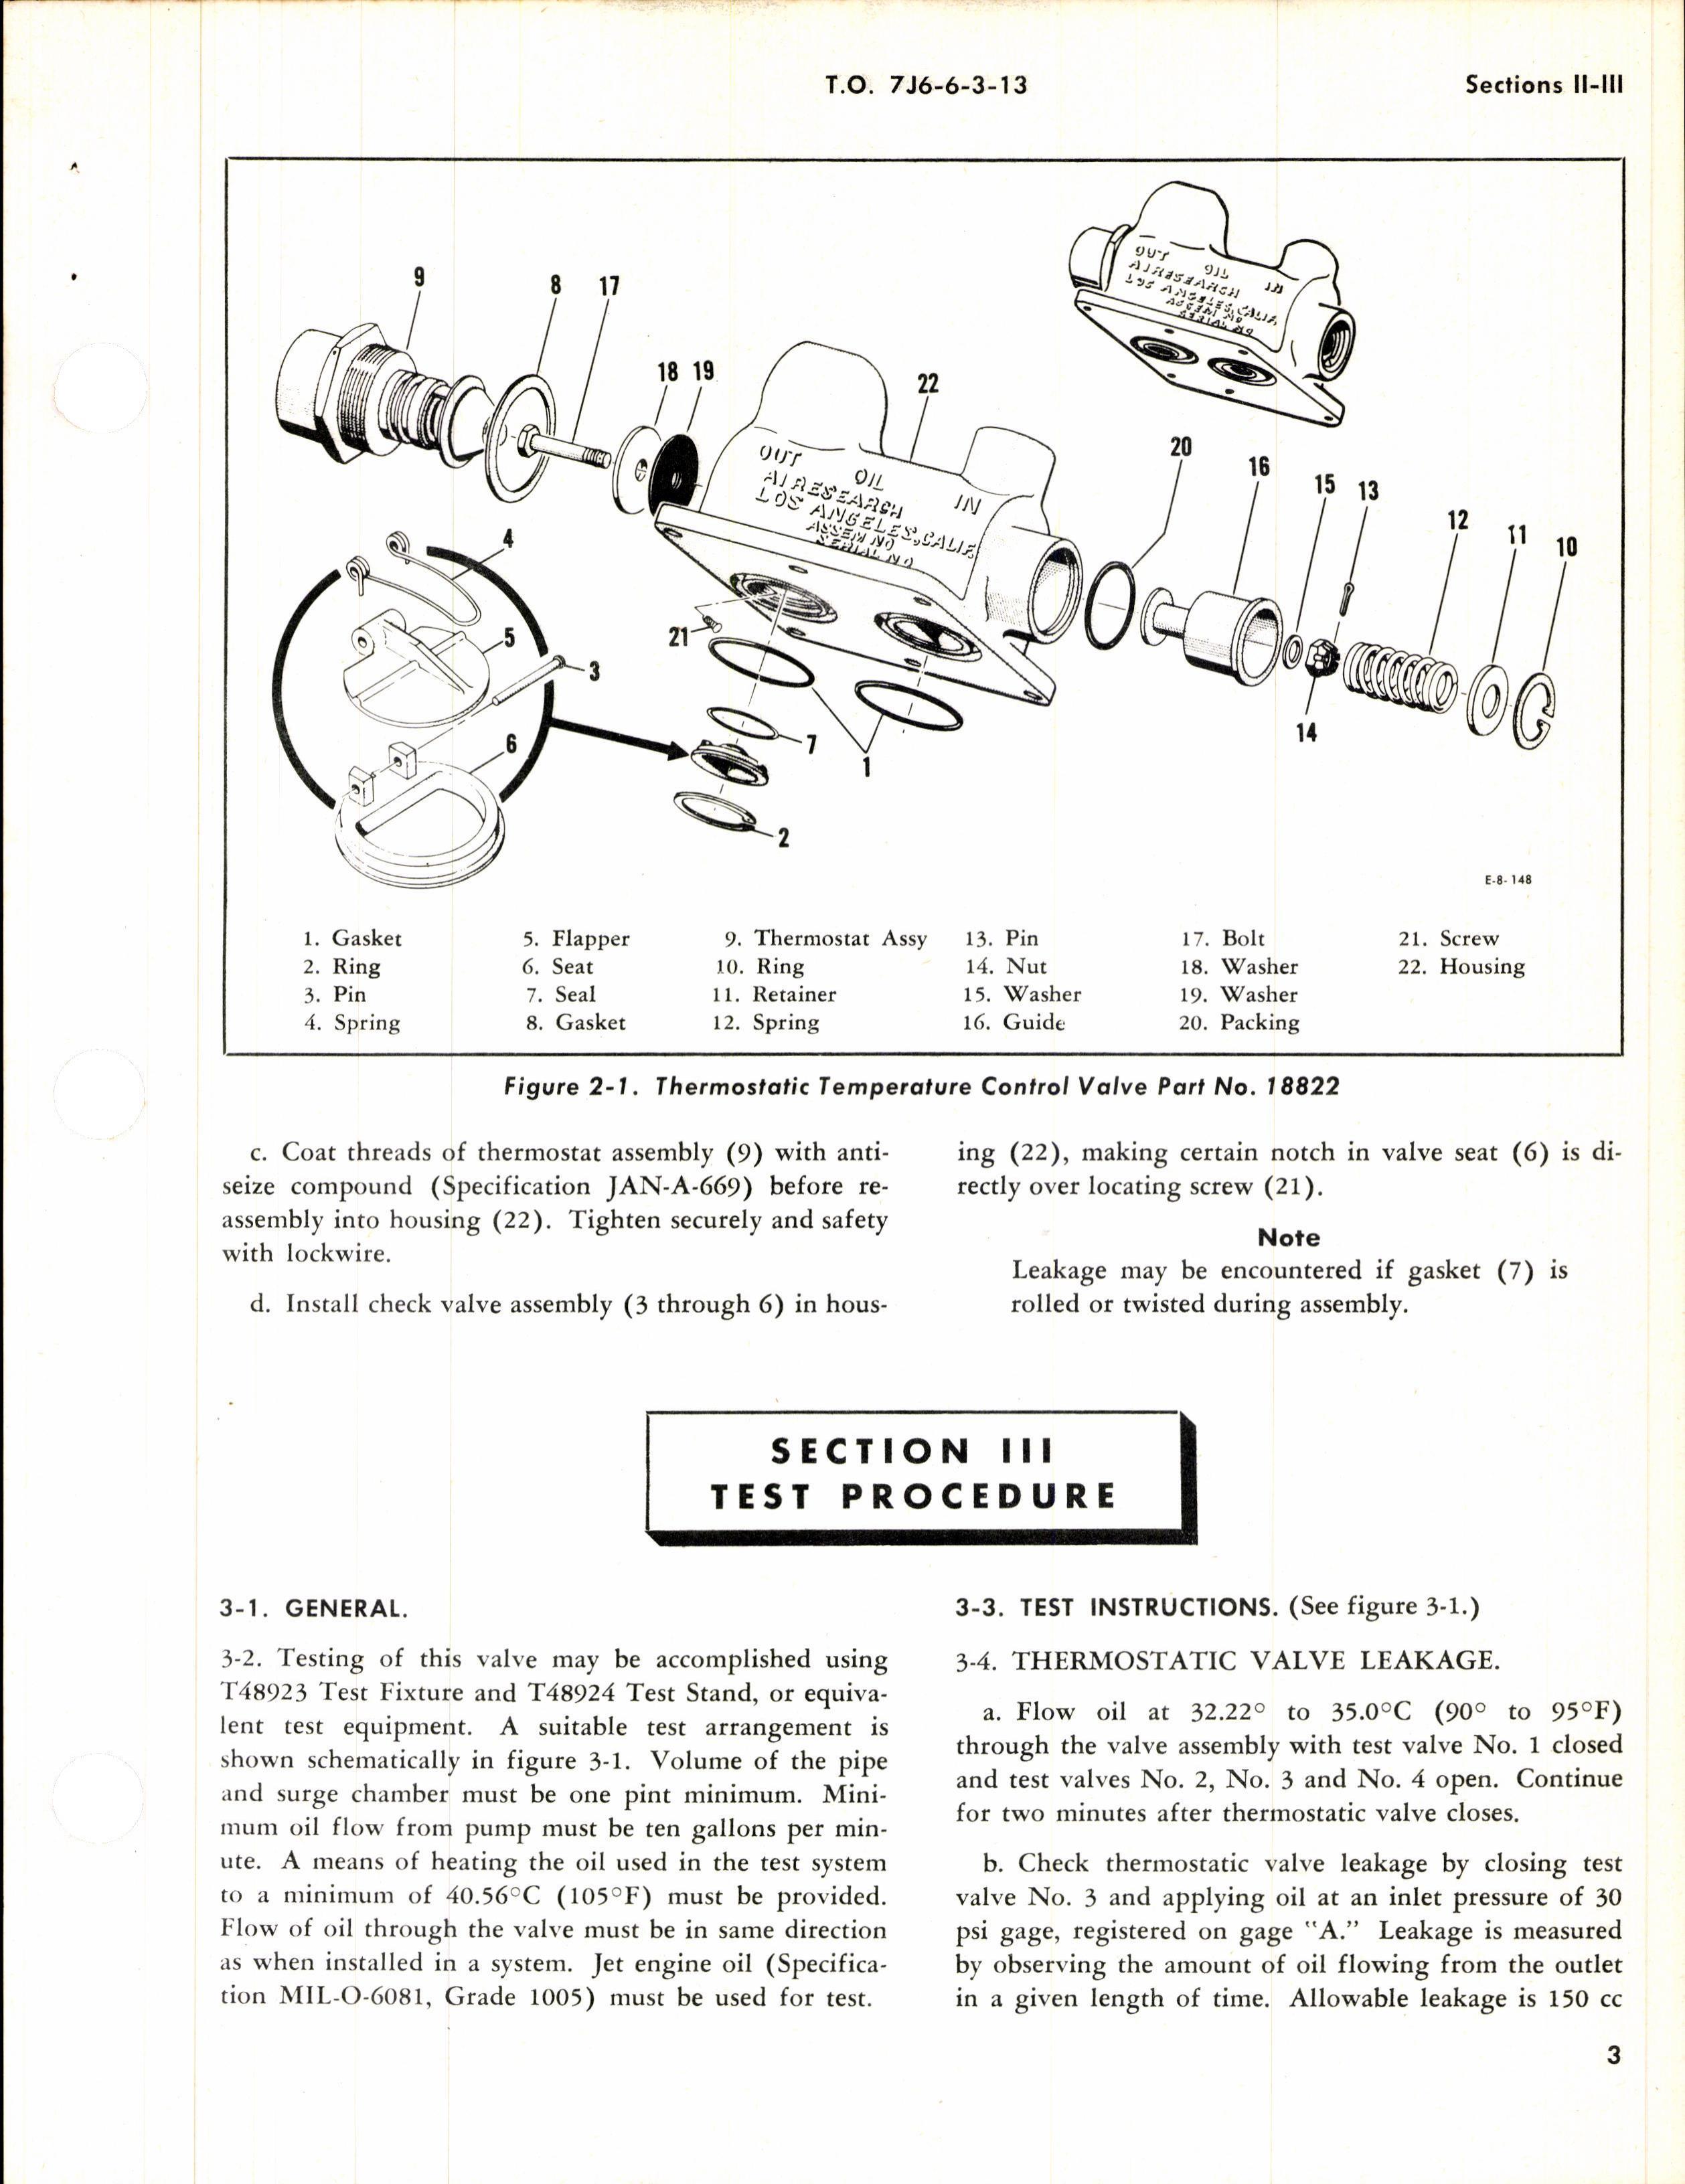 Sample page 5 from AirCorps Library document: Overhaul Instructions for Thermostatic Temperature Control Valves 